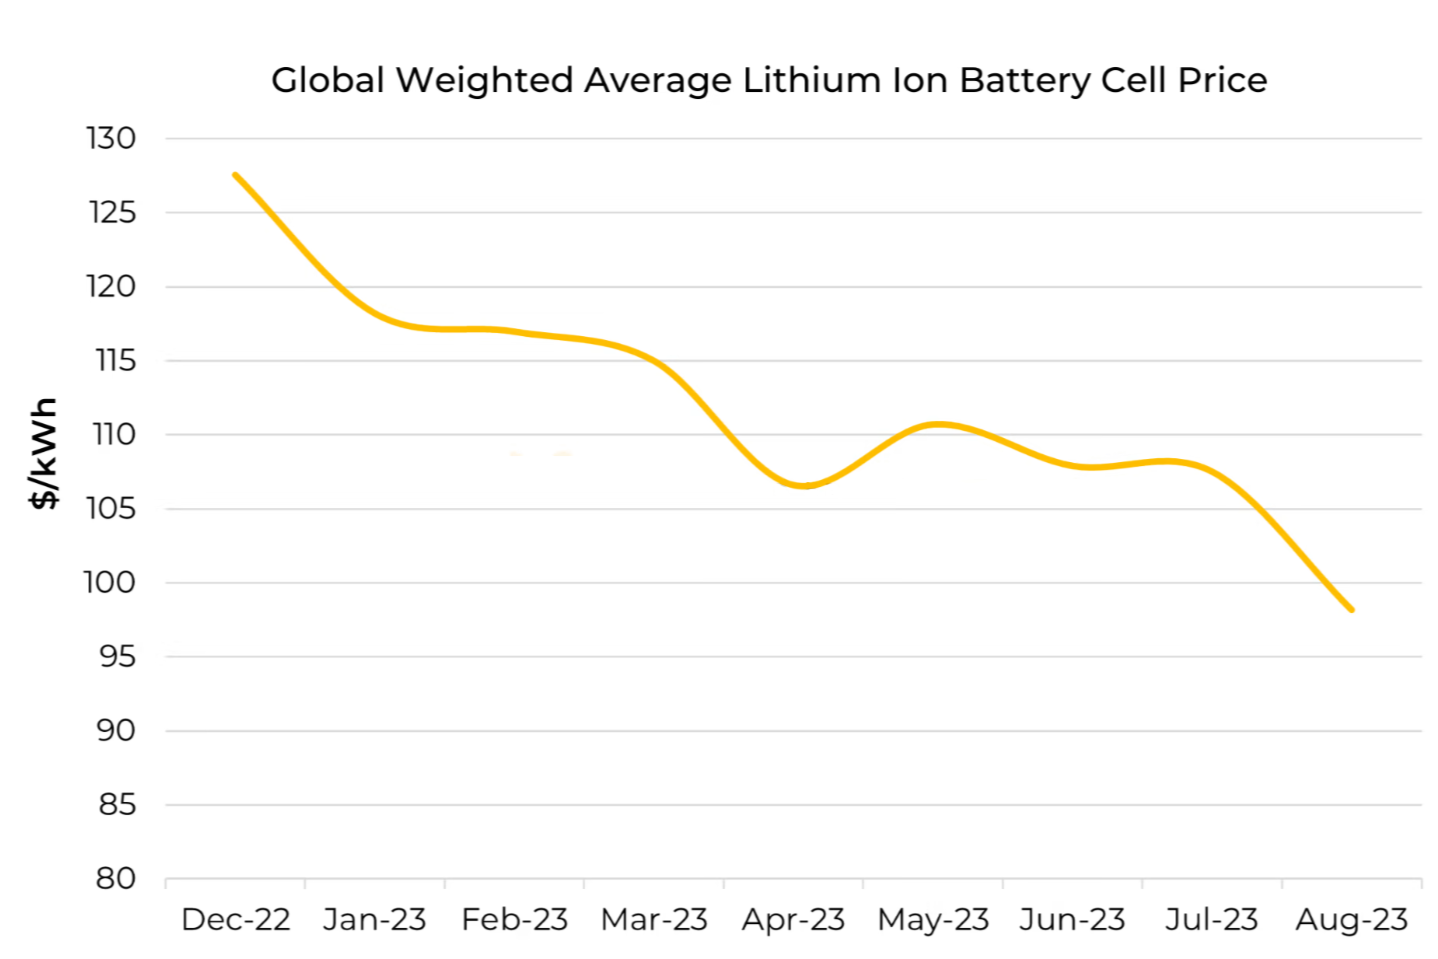 Benchmark’s global weighted average lithium-ion battery cell price dipped below $100/kWh in August 2023